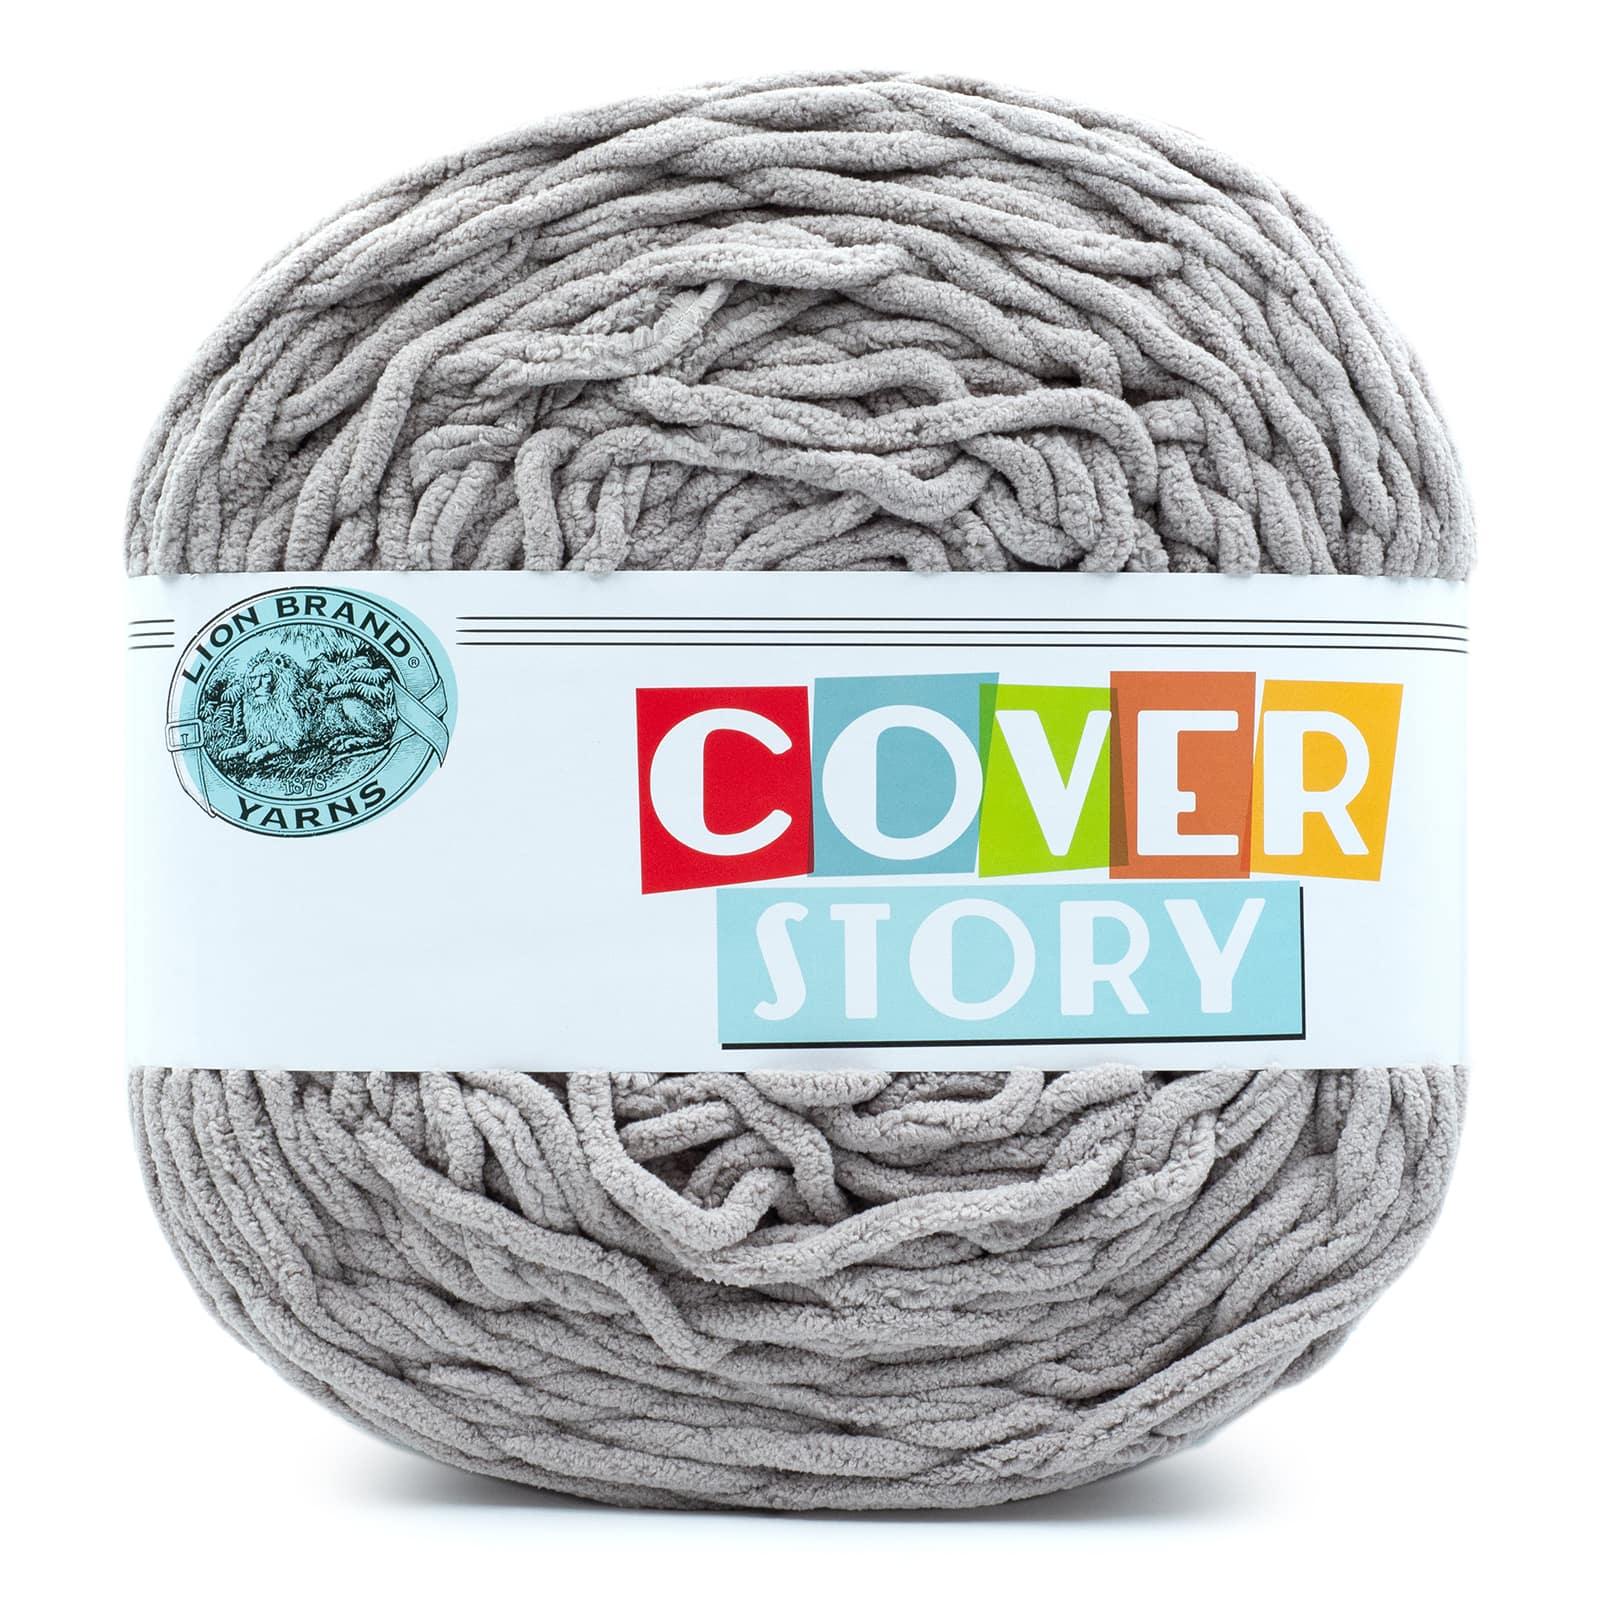 Lion BRAND Cover Story Yarn Cameo 023032063973 for sale online